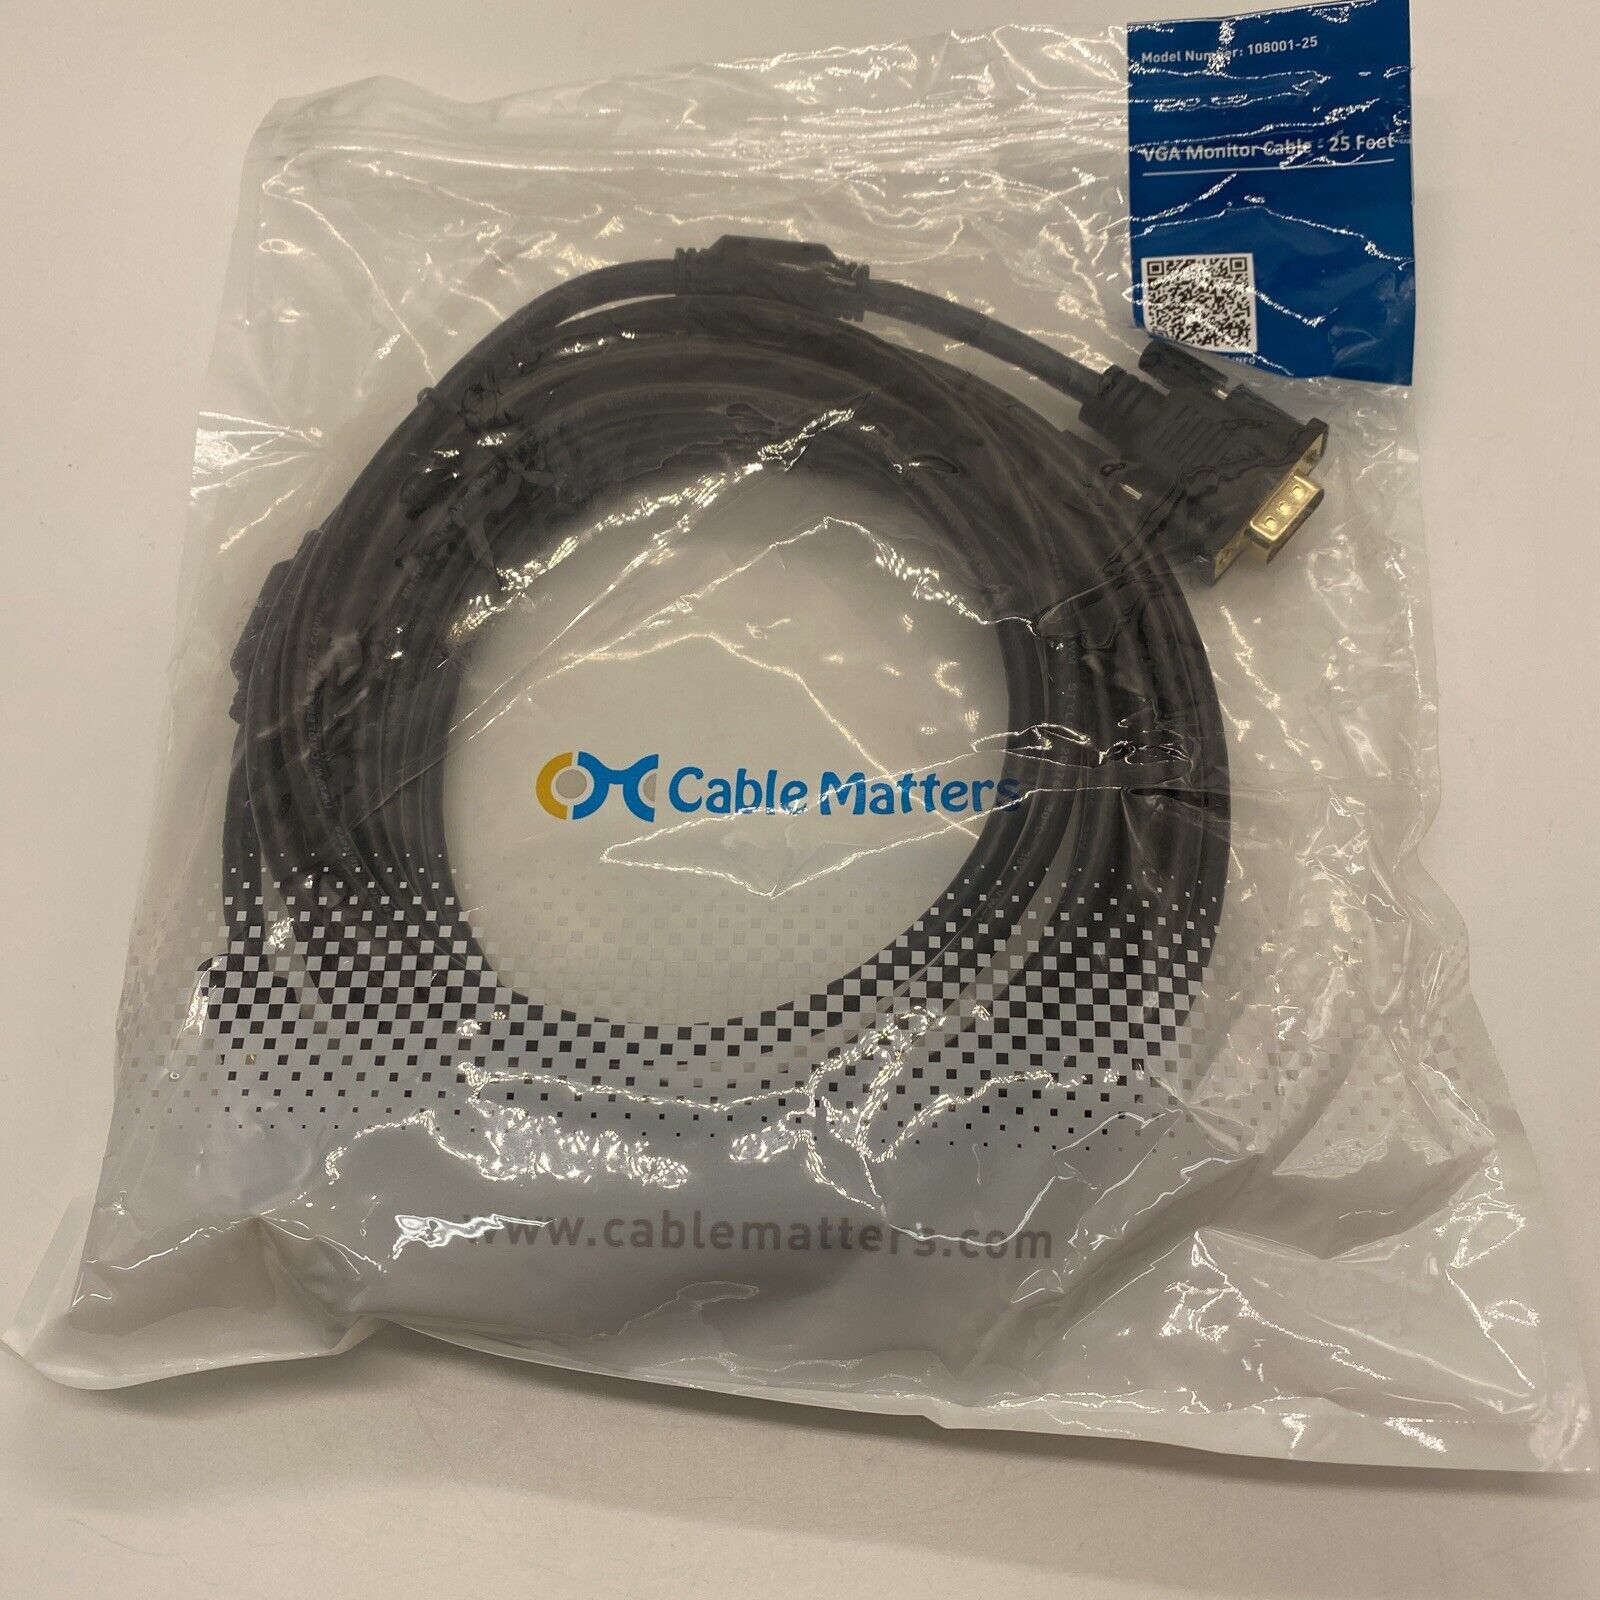 Cable Matters VGA to VGA Cable with Ferrites (SVGA Cable) 25 Feet NEW 108001-25